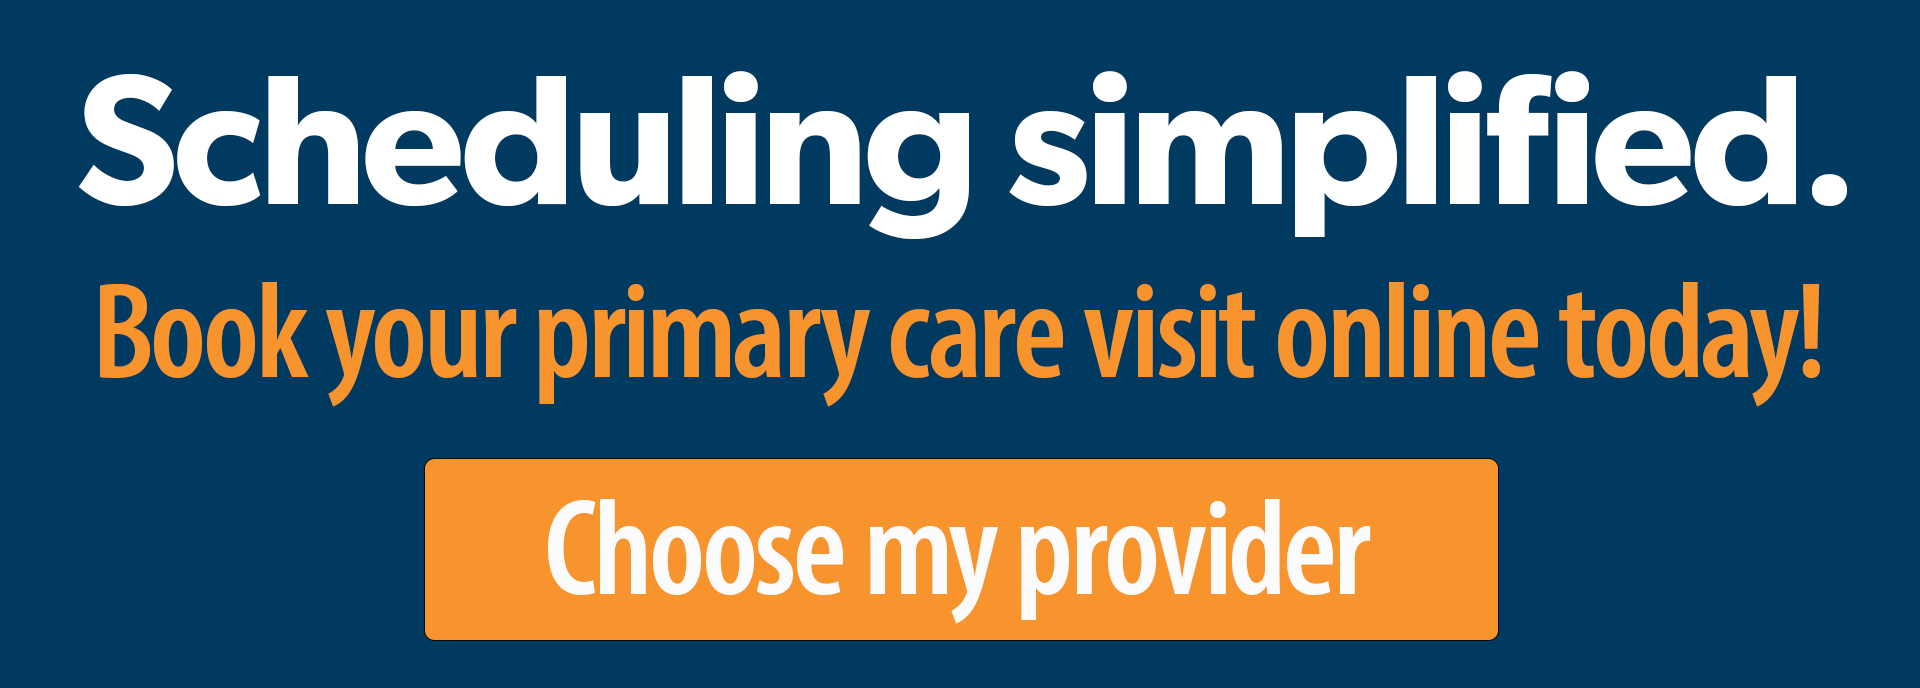 Scheduling Simplified. Book your primary care visit online today! Choose my provider